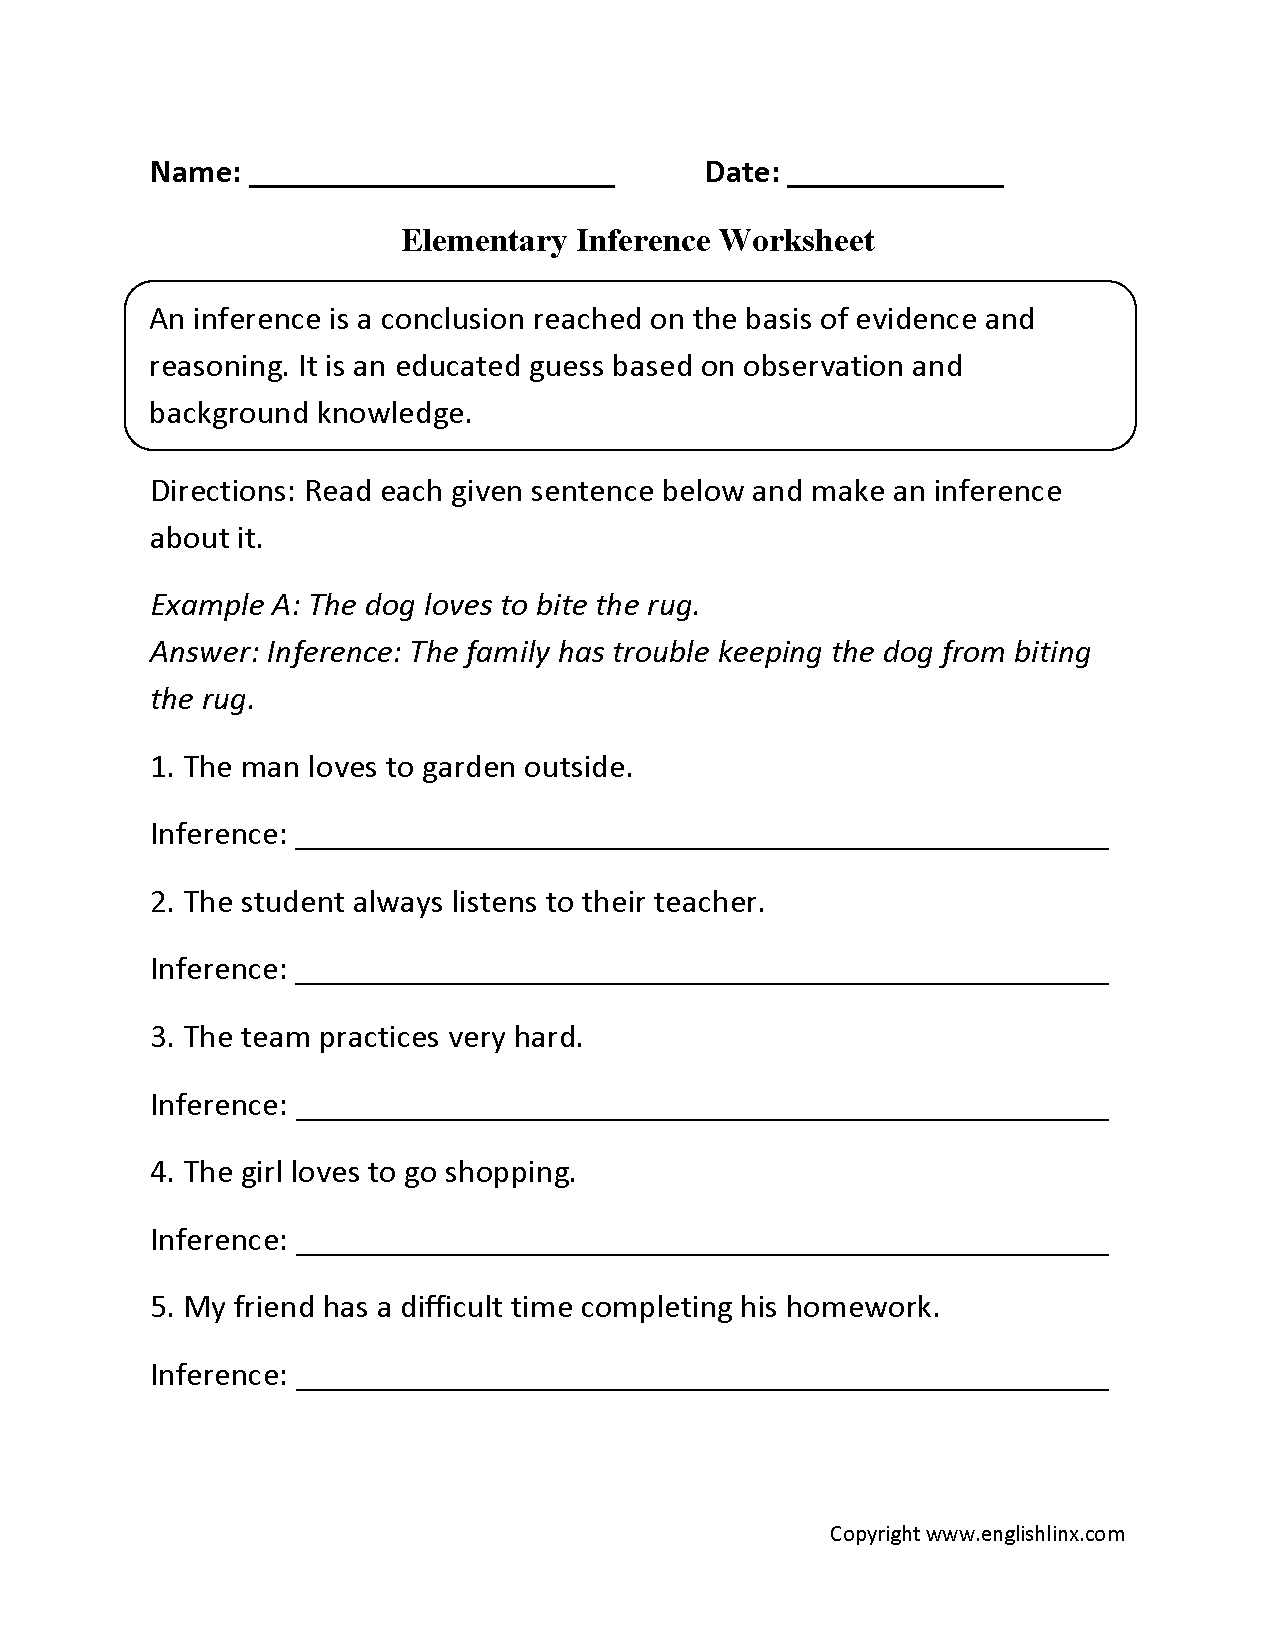 Elementary Inference Worksheets